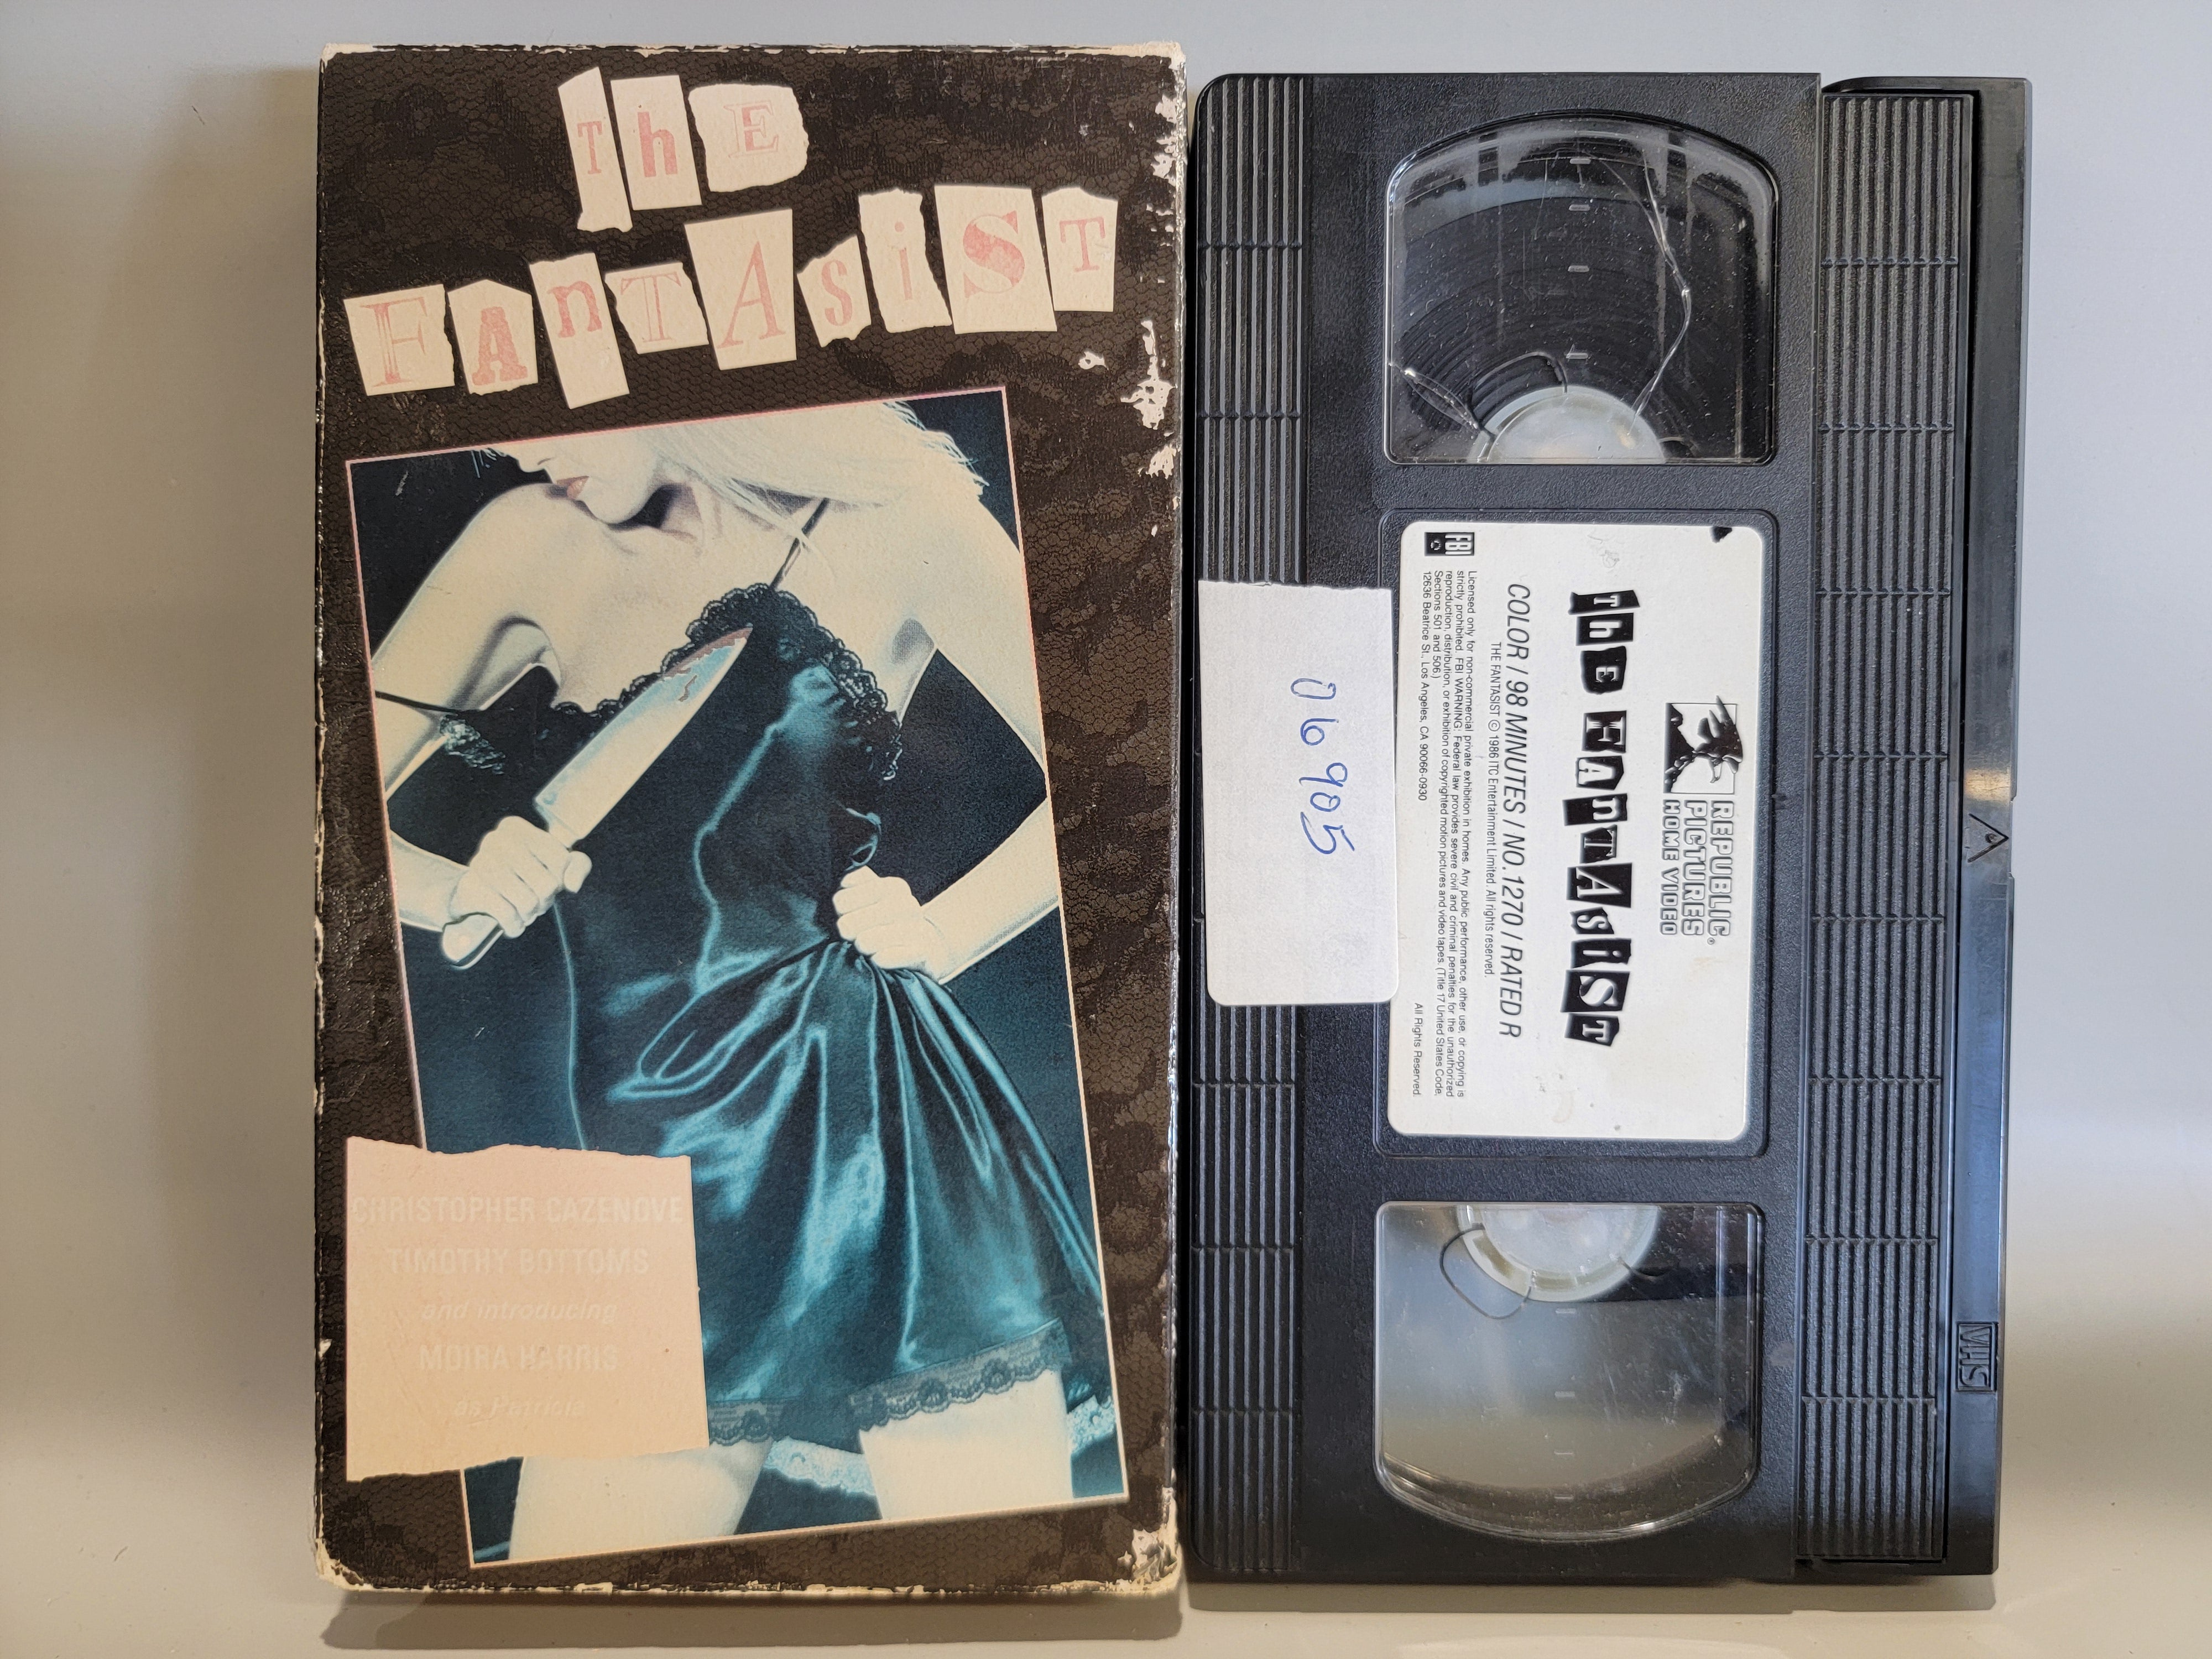 THE FANTASIST VHS [USED]